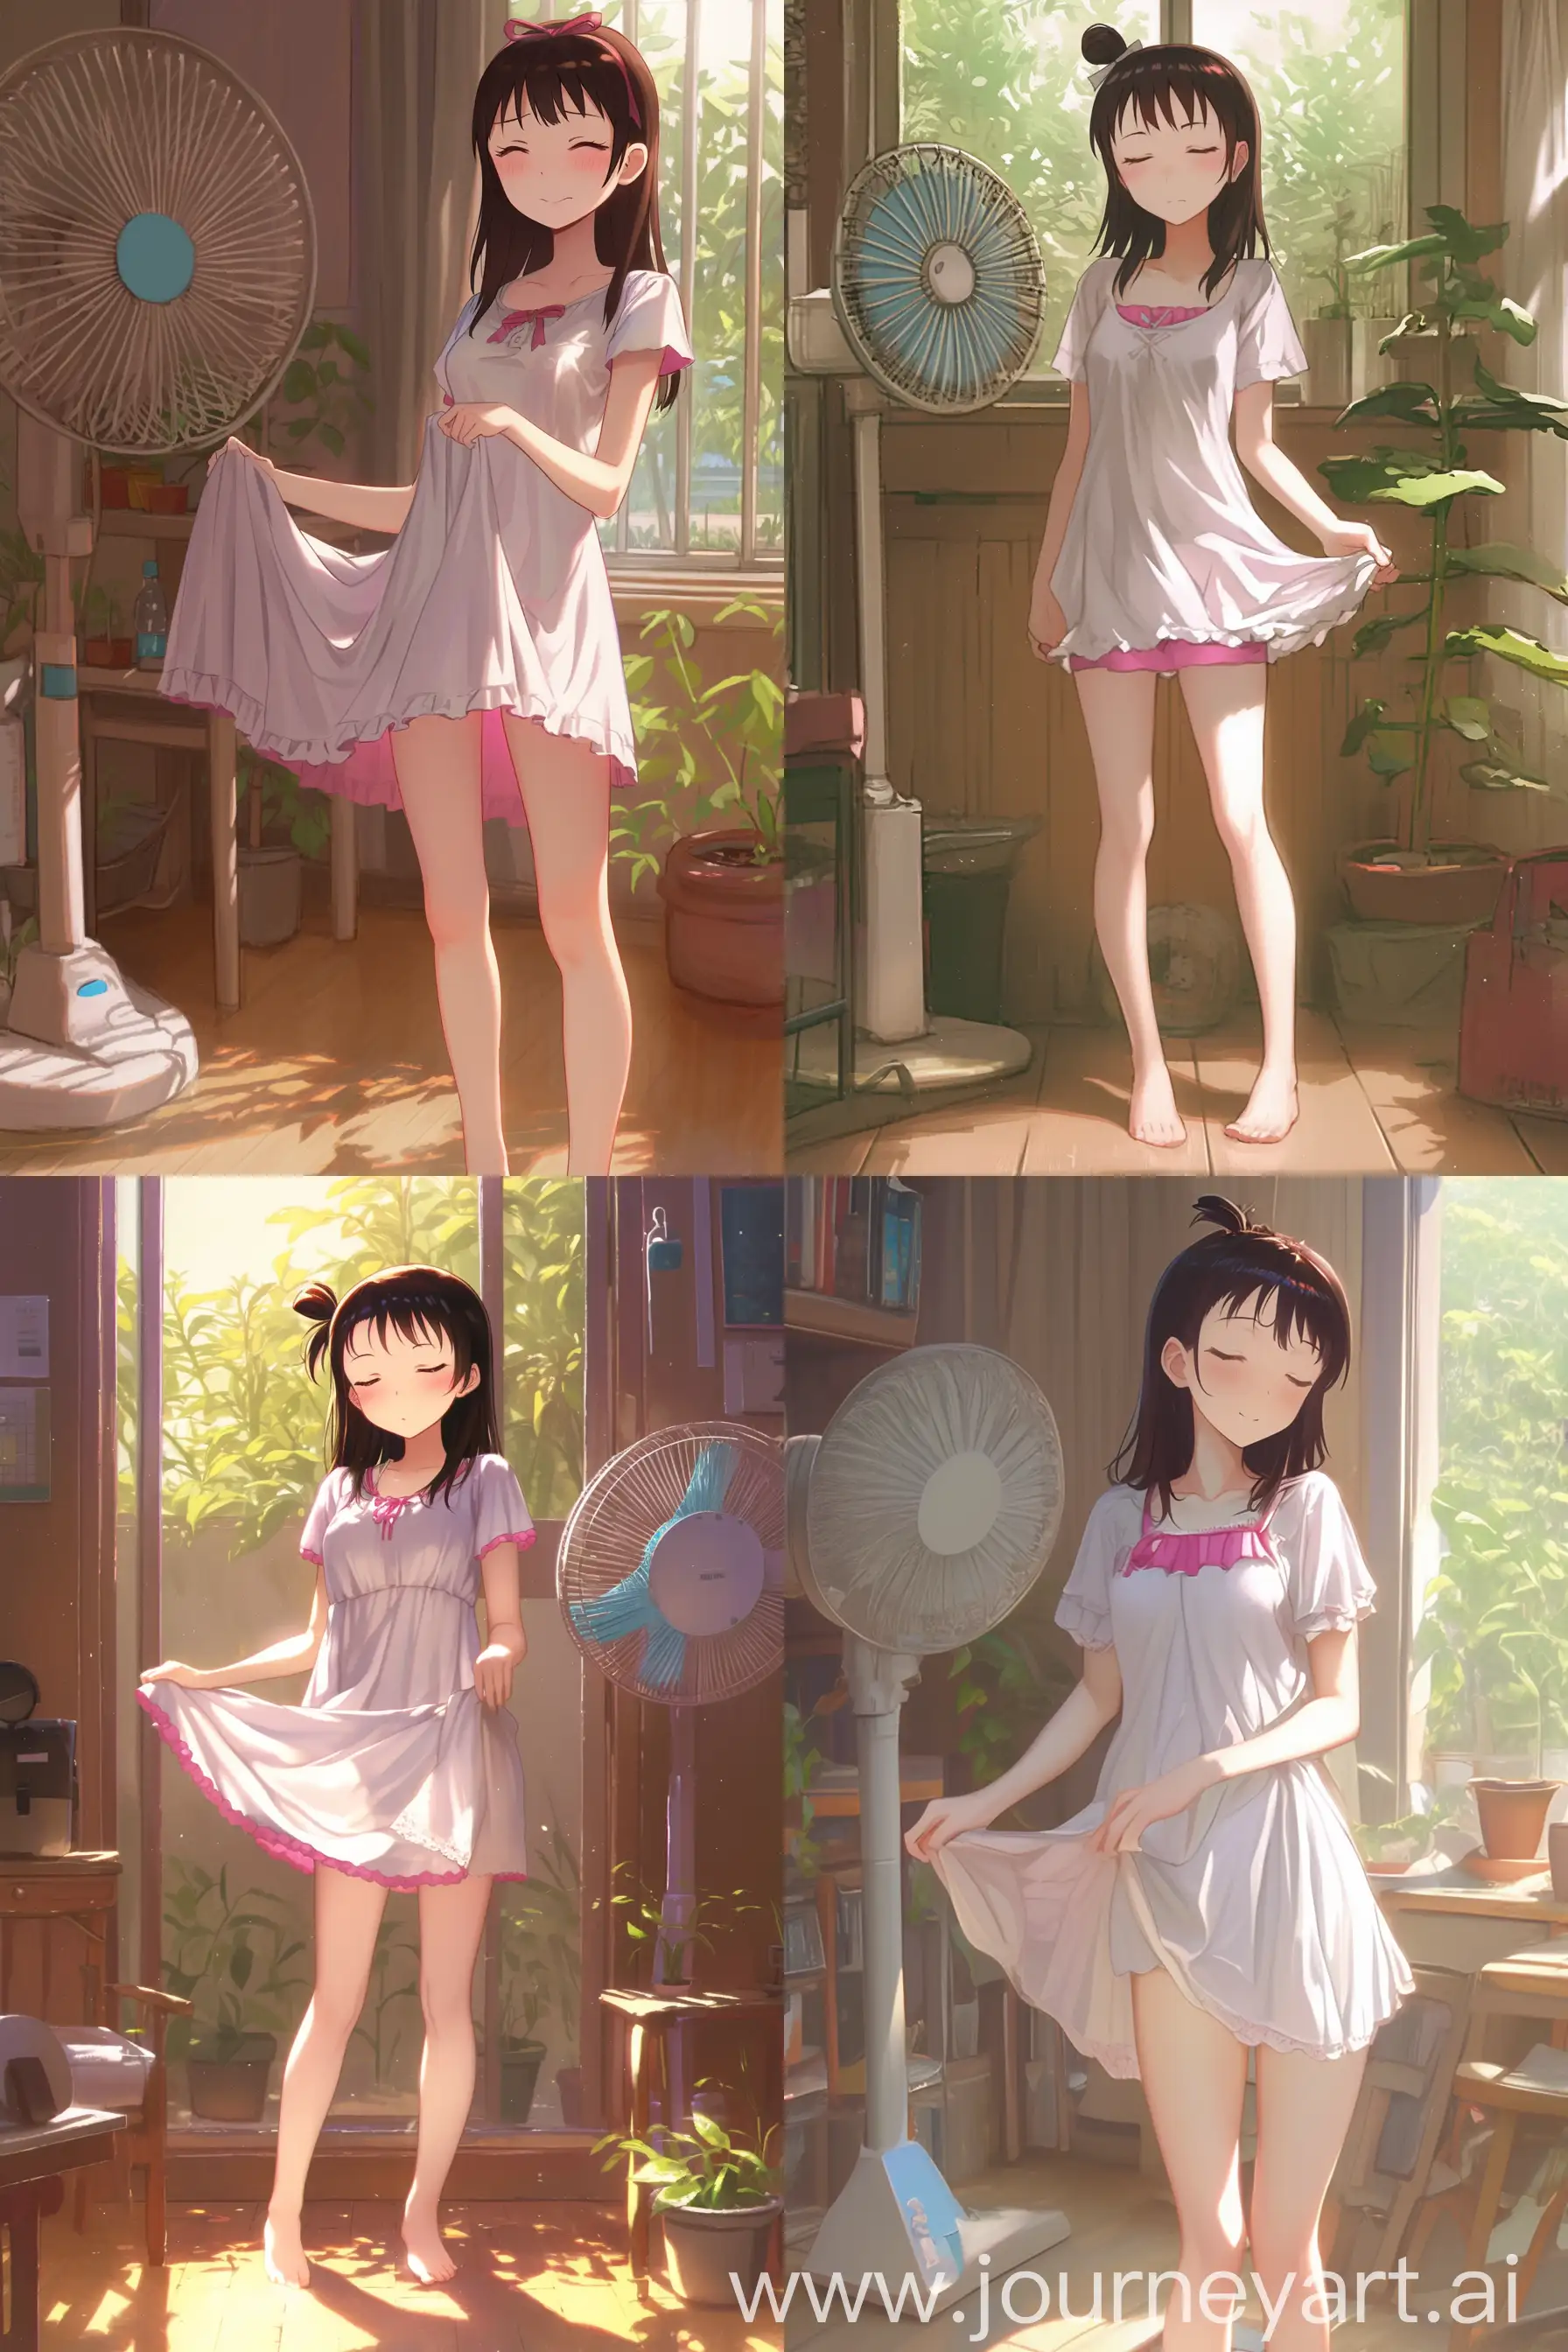 Anime-Girl-in-White-Dress-Standing-by-a-Fan-in-Cozy-Room-Setting